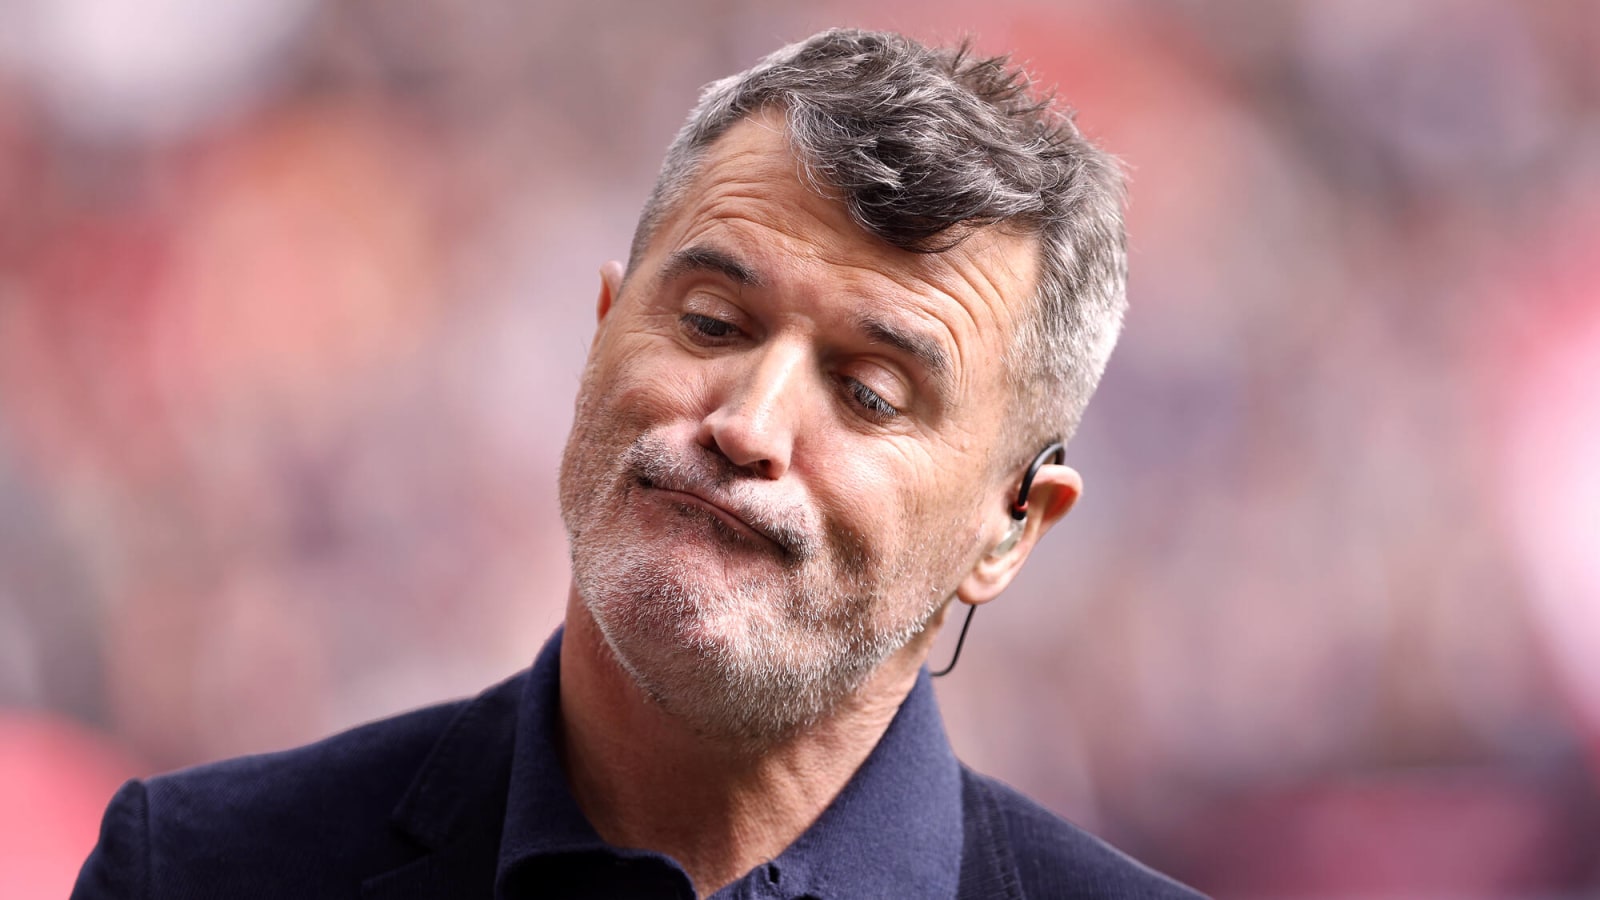 Roy Keane gives usual strong reaction to Man Utd Arsenal game